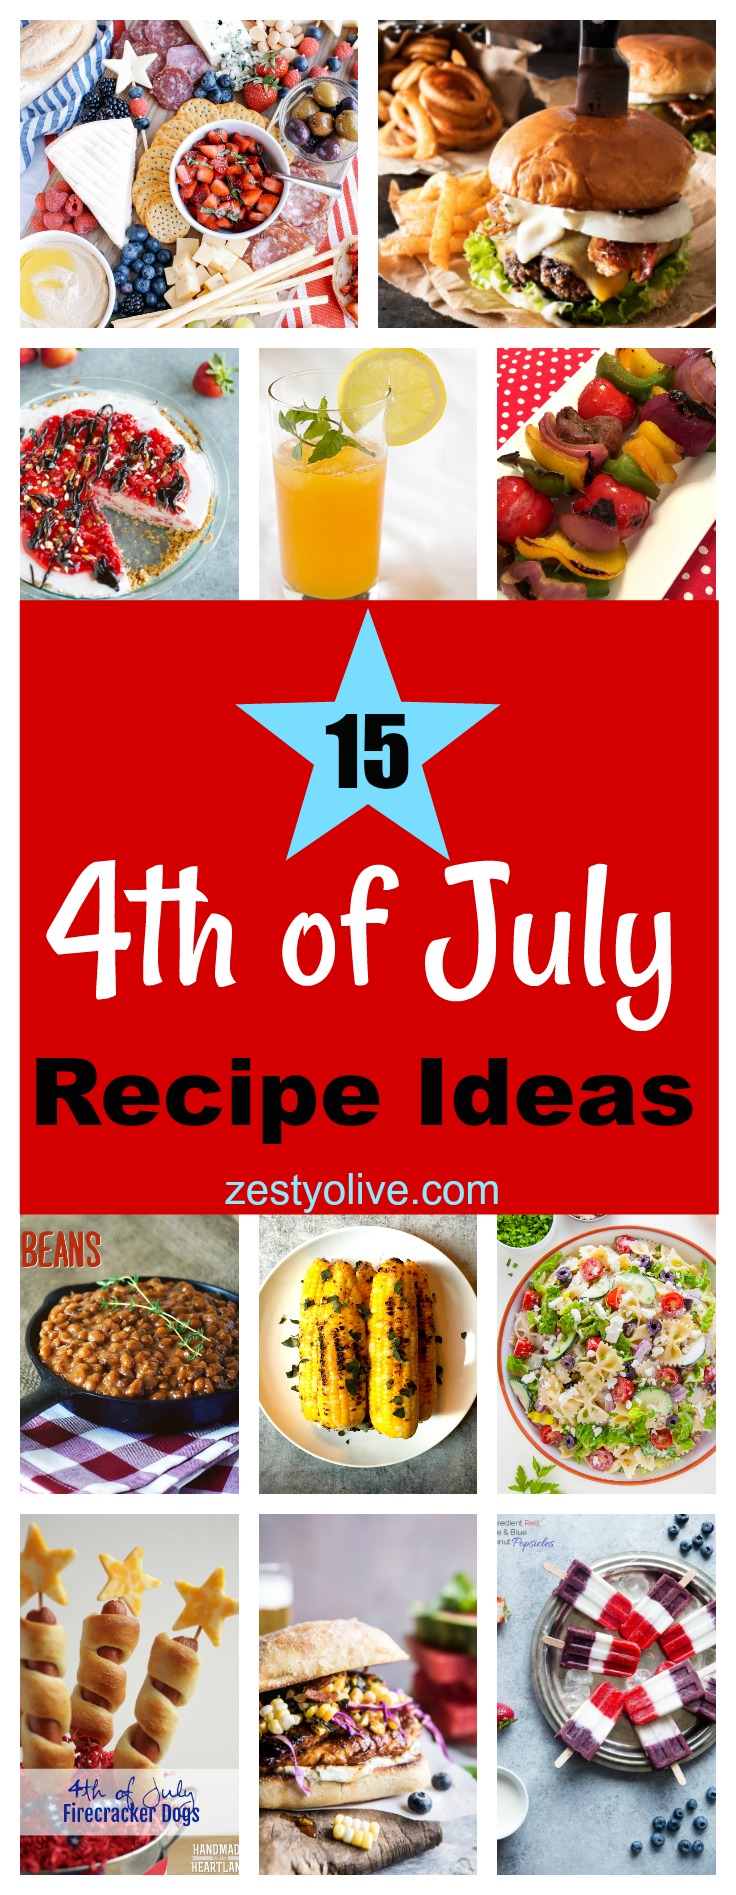 4th of July Patriotic Recipe and Menu Ideas for Your Independence Day Celebration, Cookout, Party or Picnic.